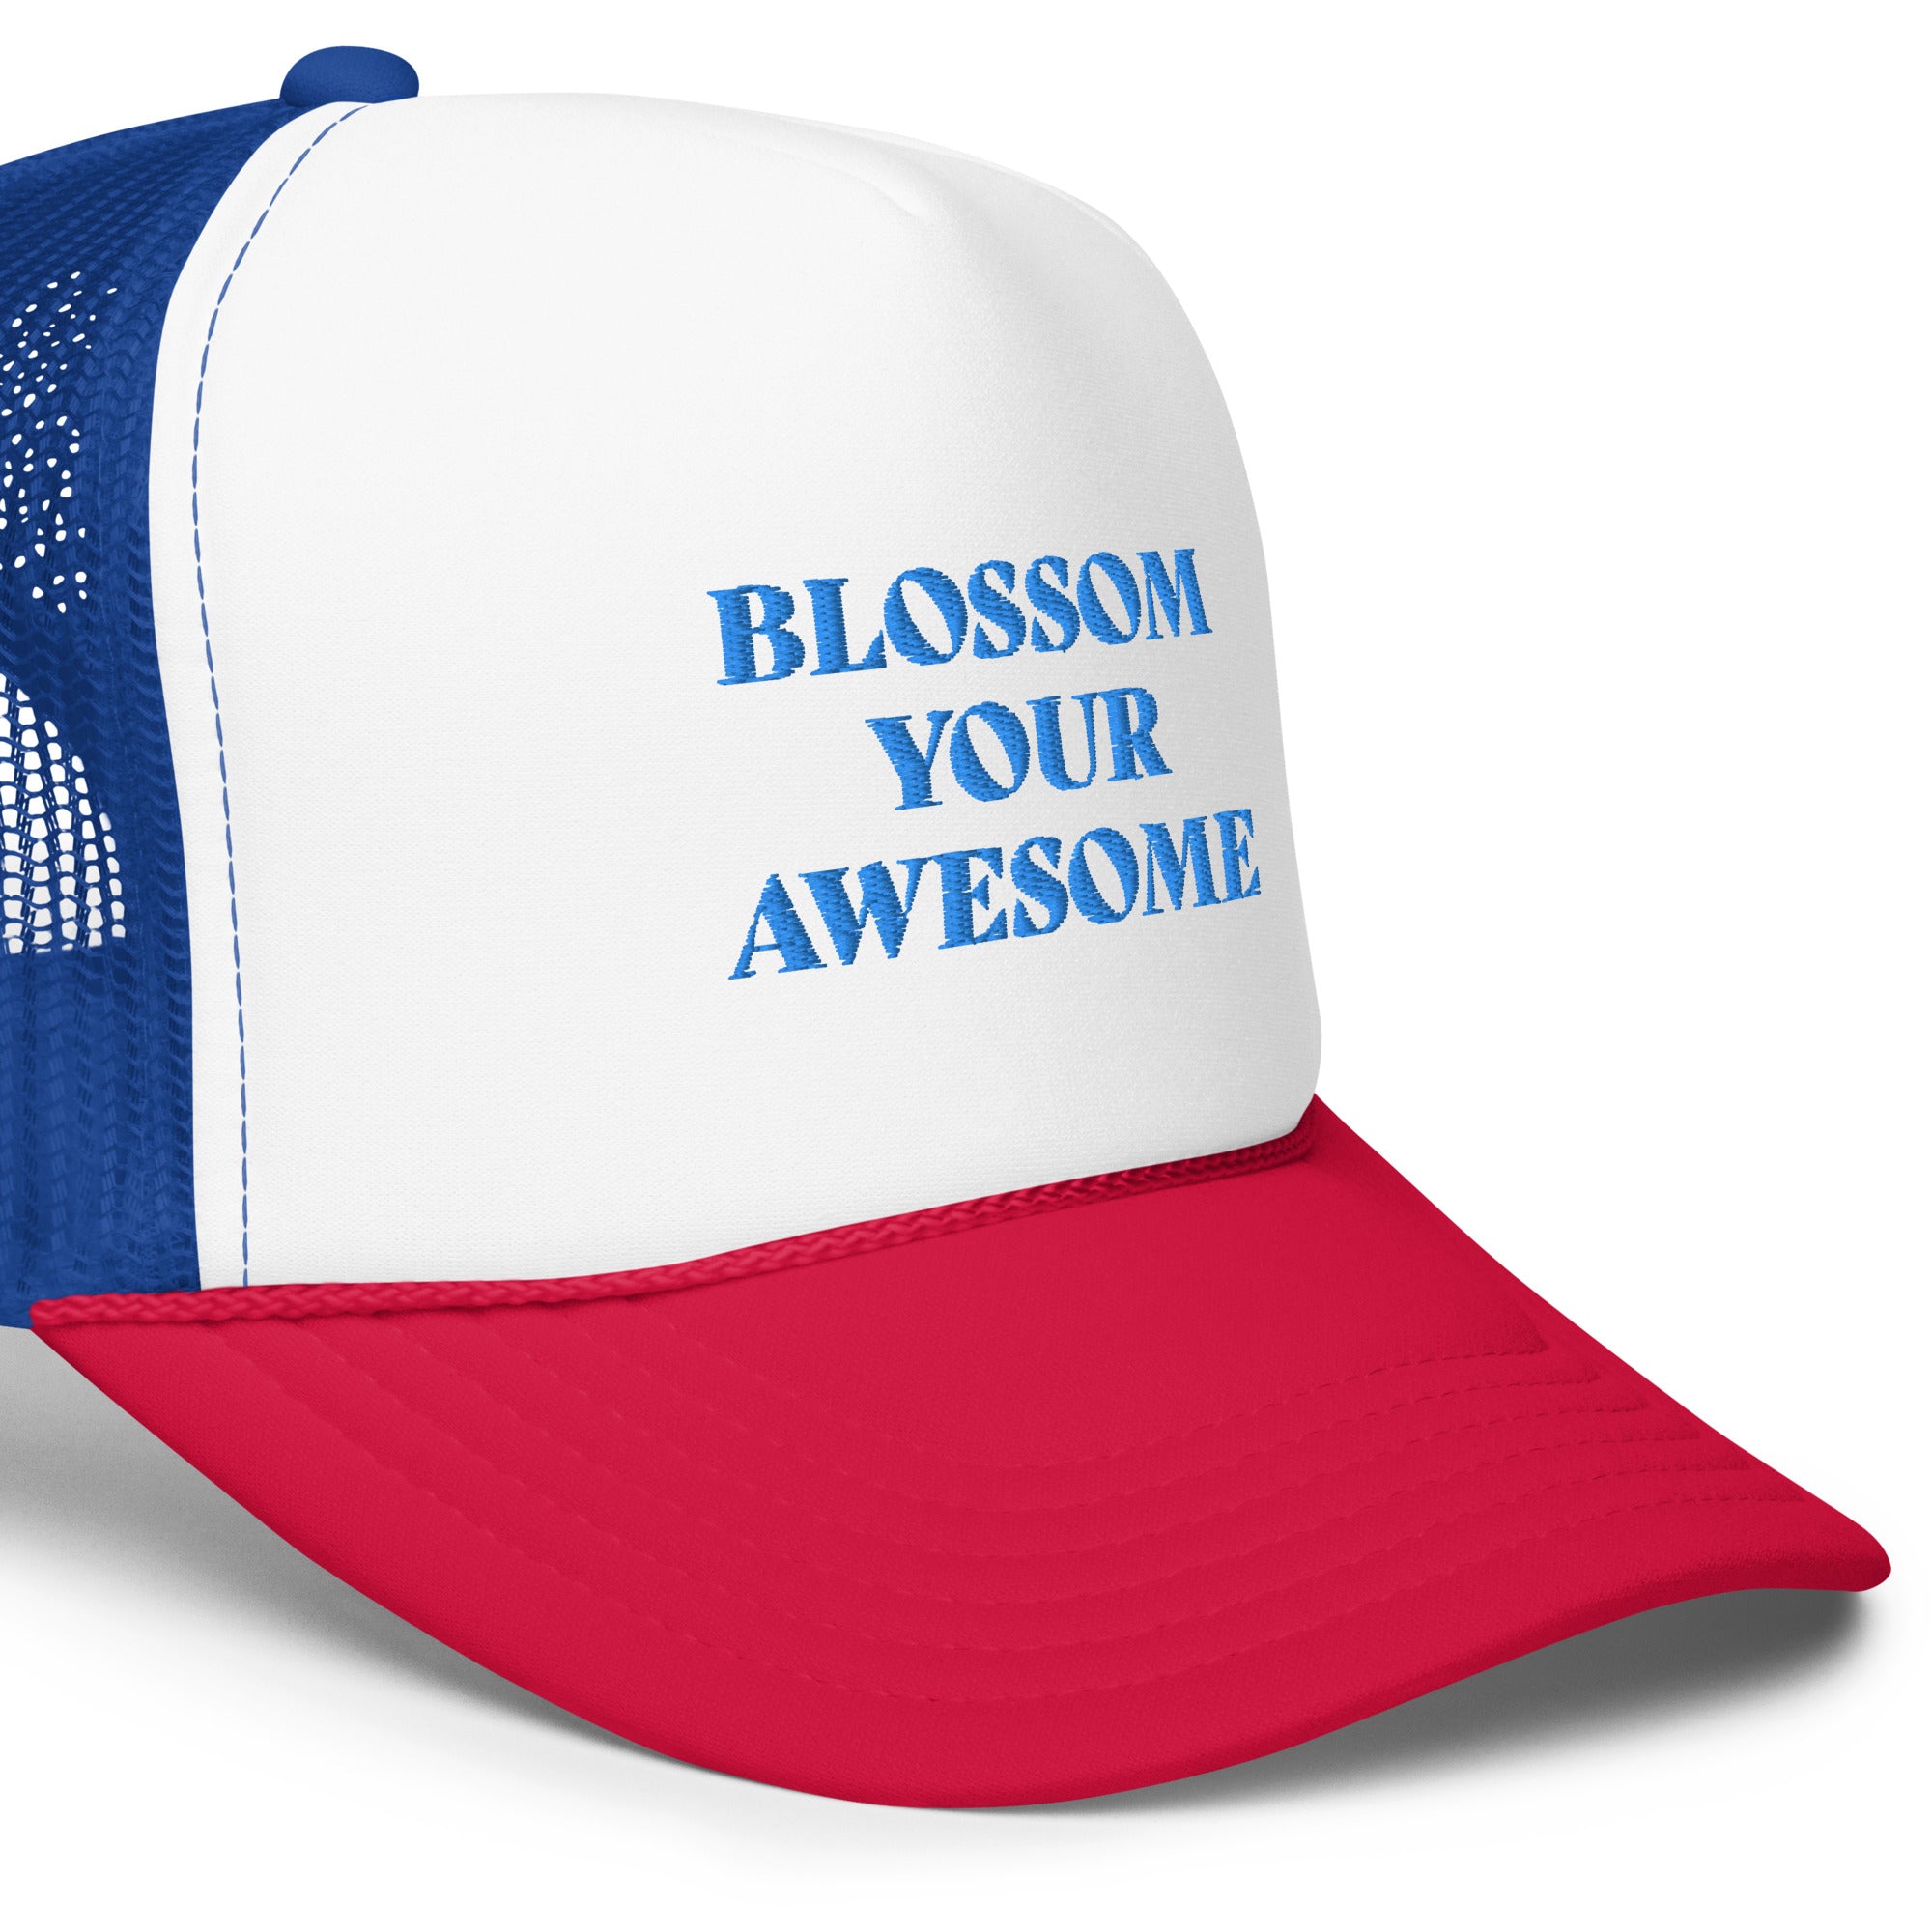 Blossom Your Awesome Trucker Hat